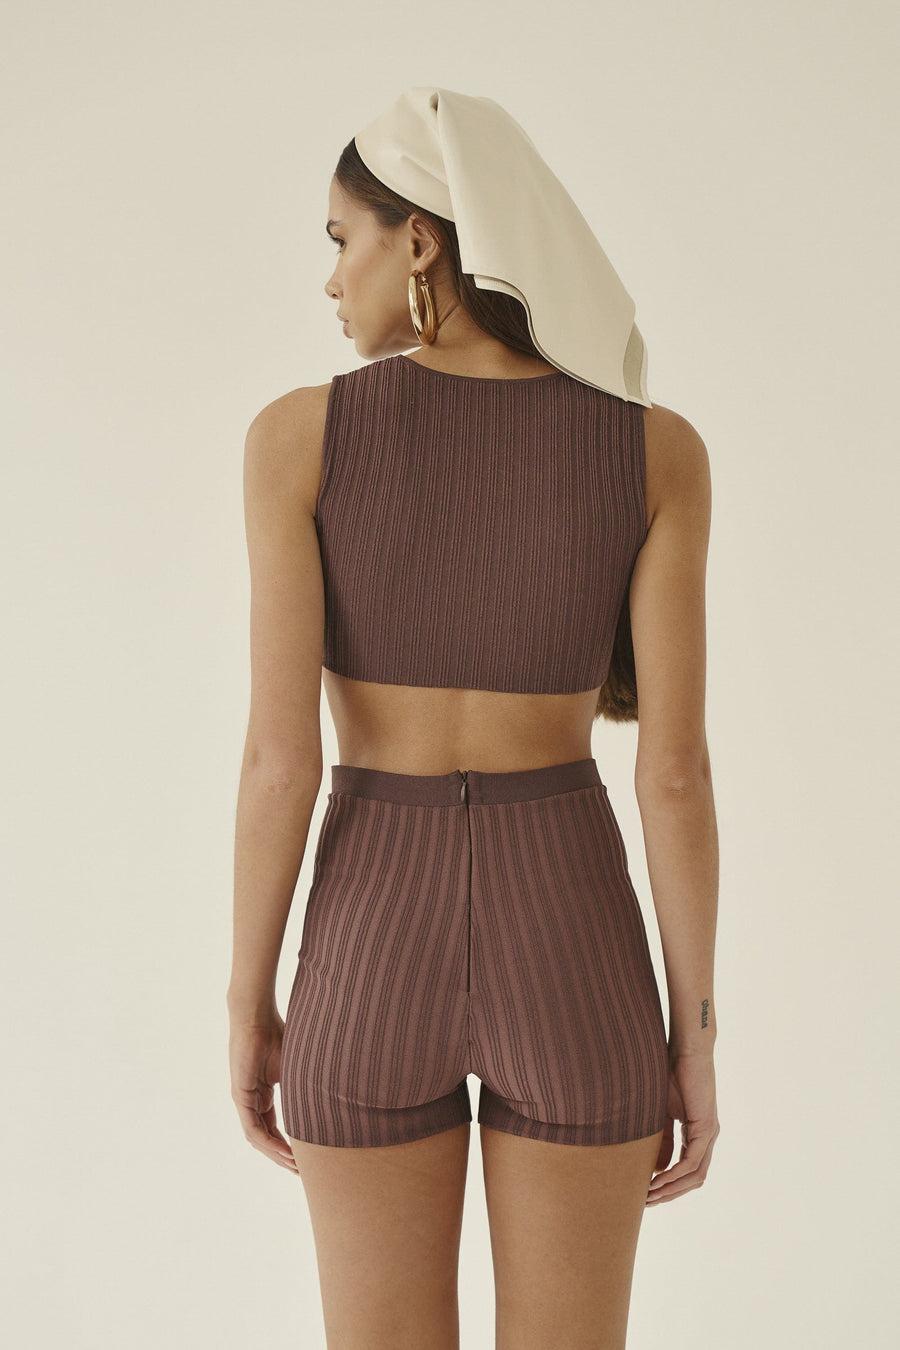 "COLT" Bandage Crop in Chocolate